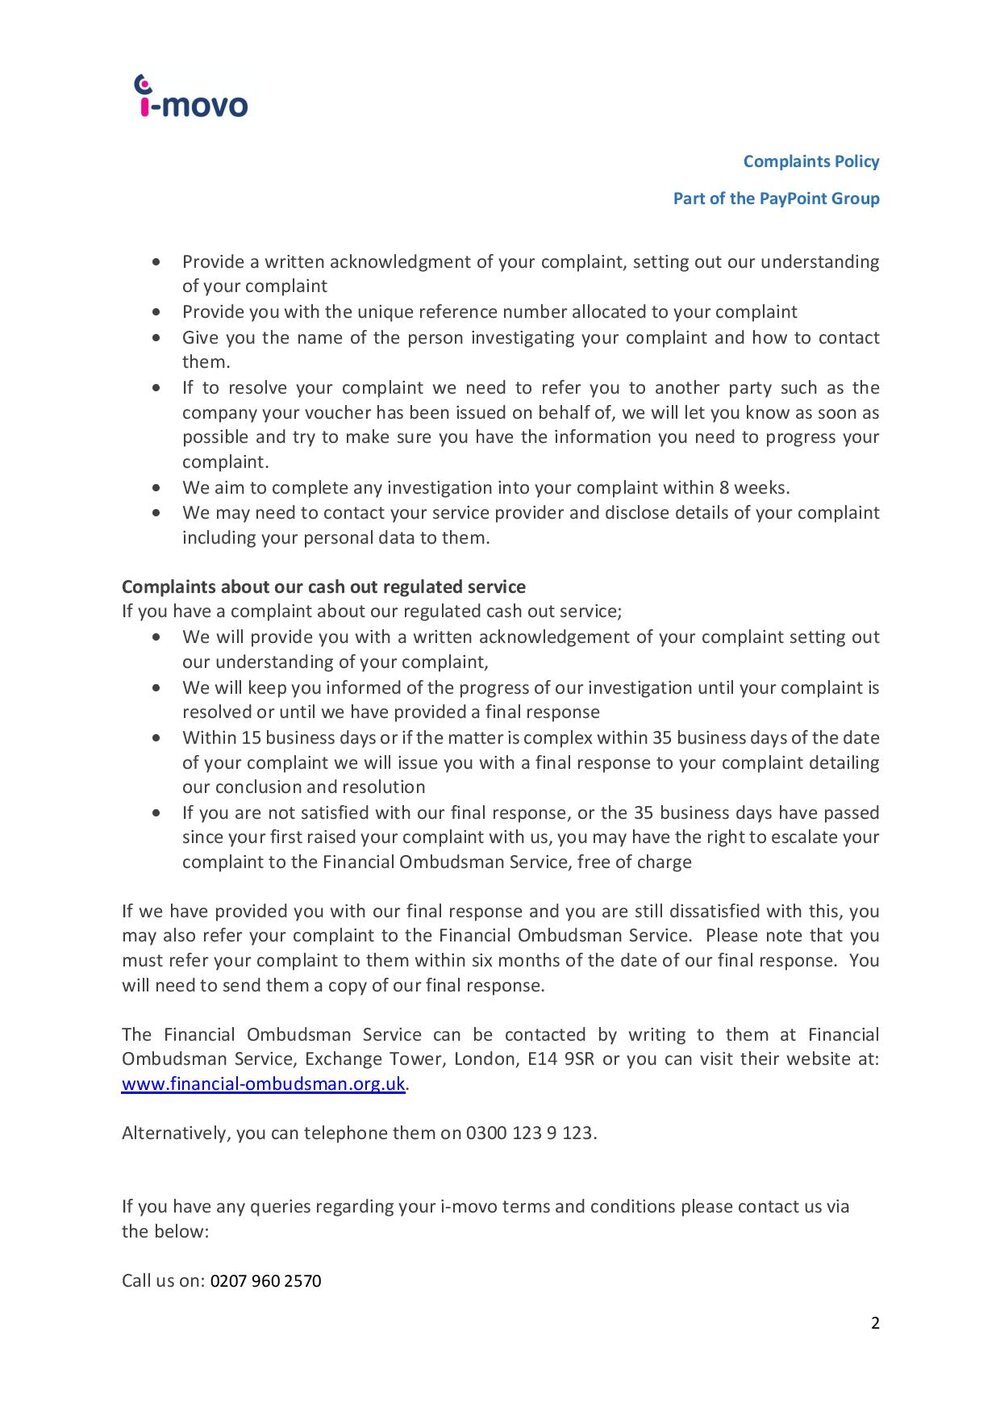 i-movo Complaints Policy - v1.2. 18.12.2020-page-002.jpg